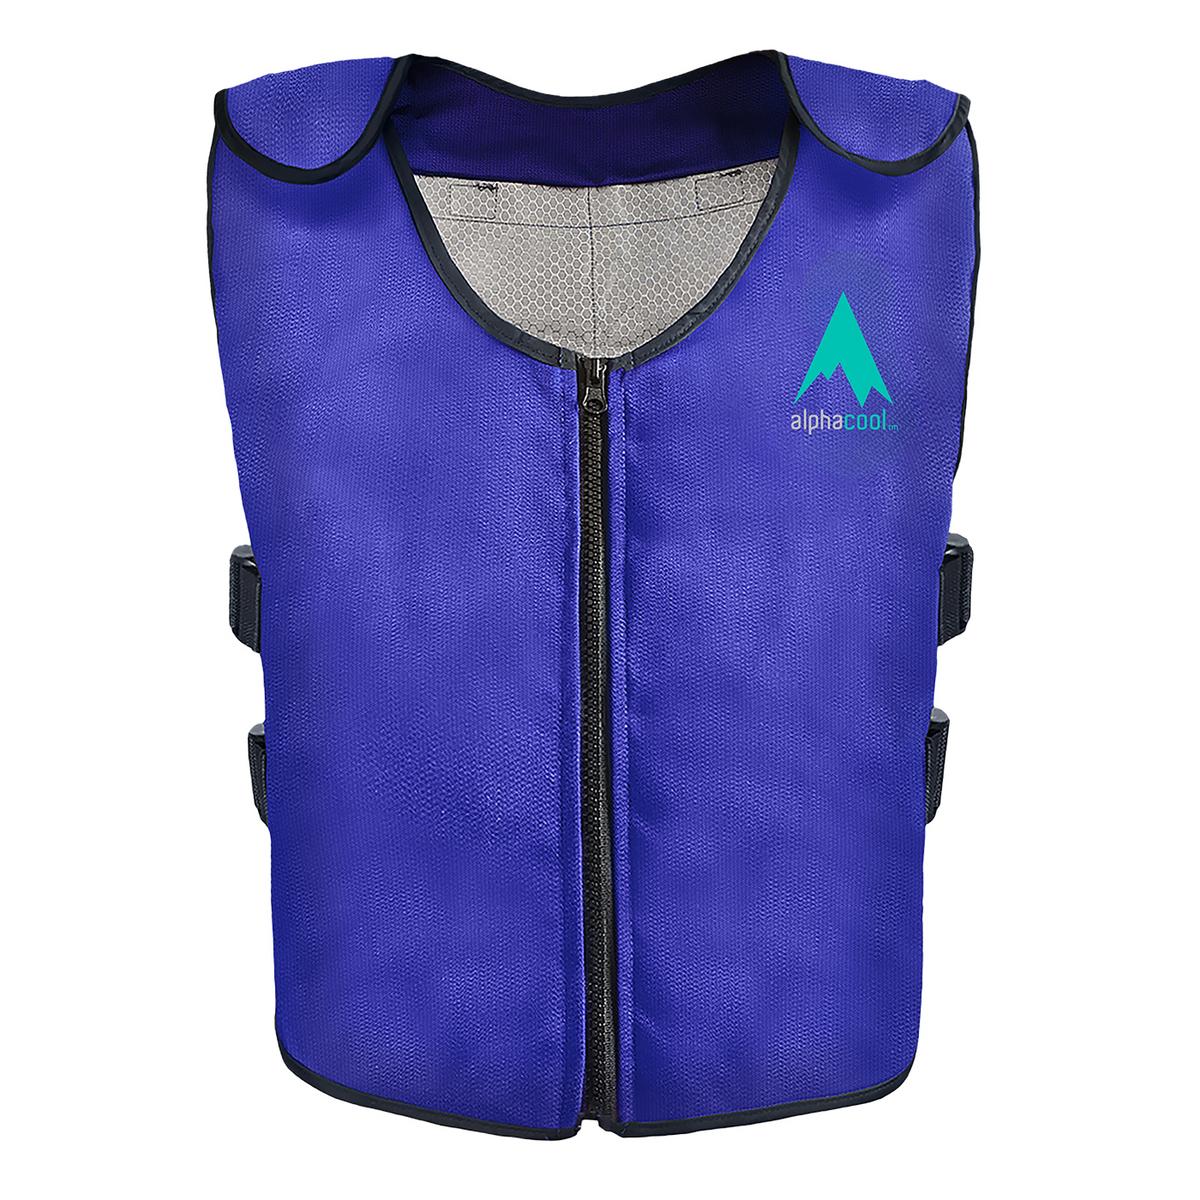 AlphaCool Arctic Cooling Ice Vest with Self-Fill Reusable Ice Packs